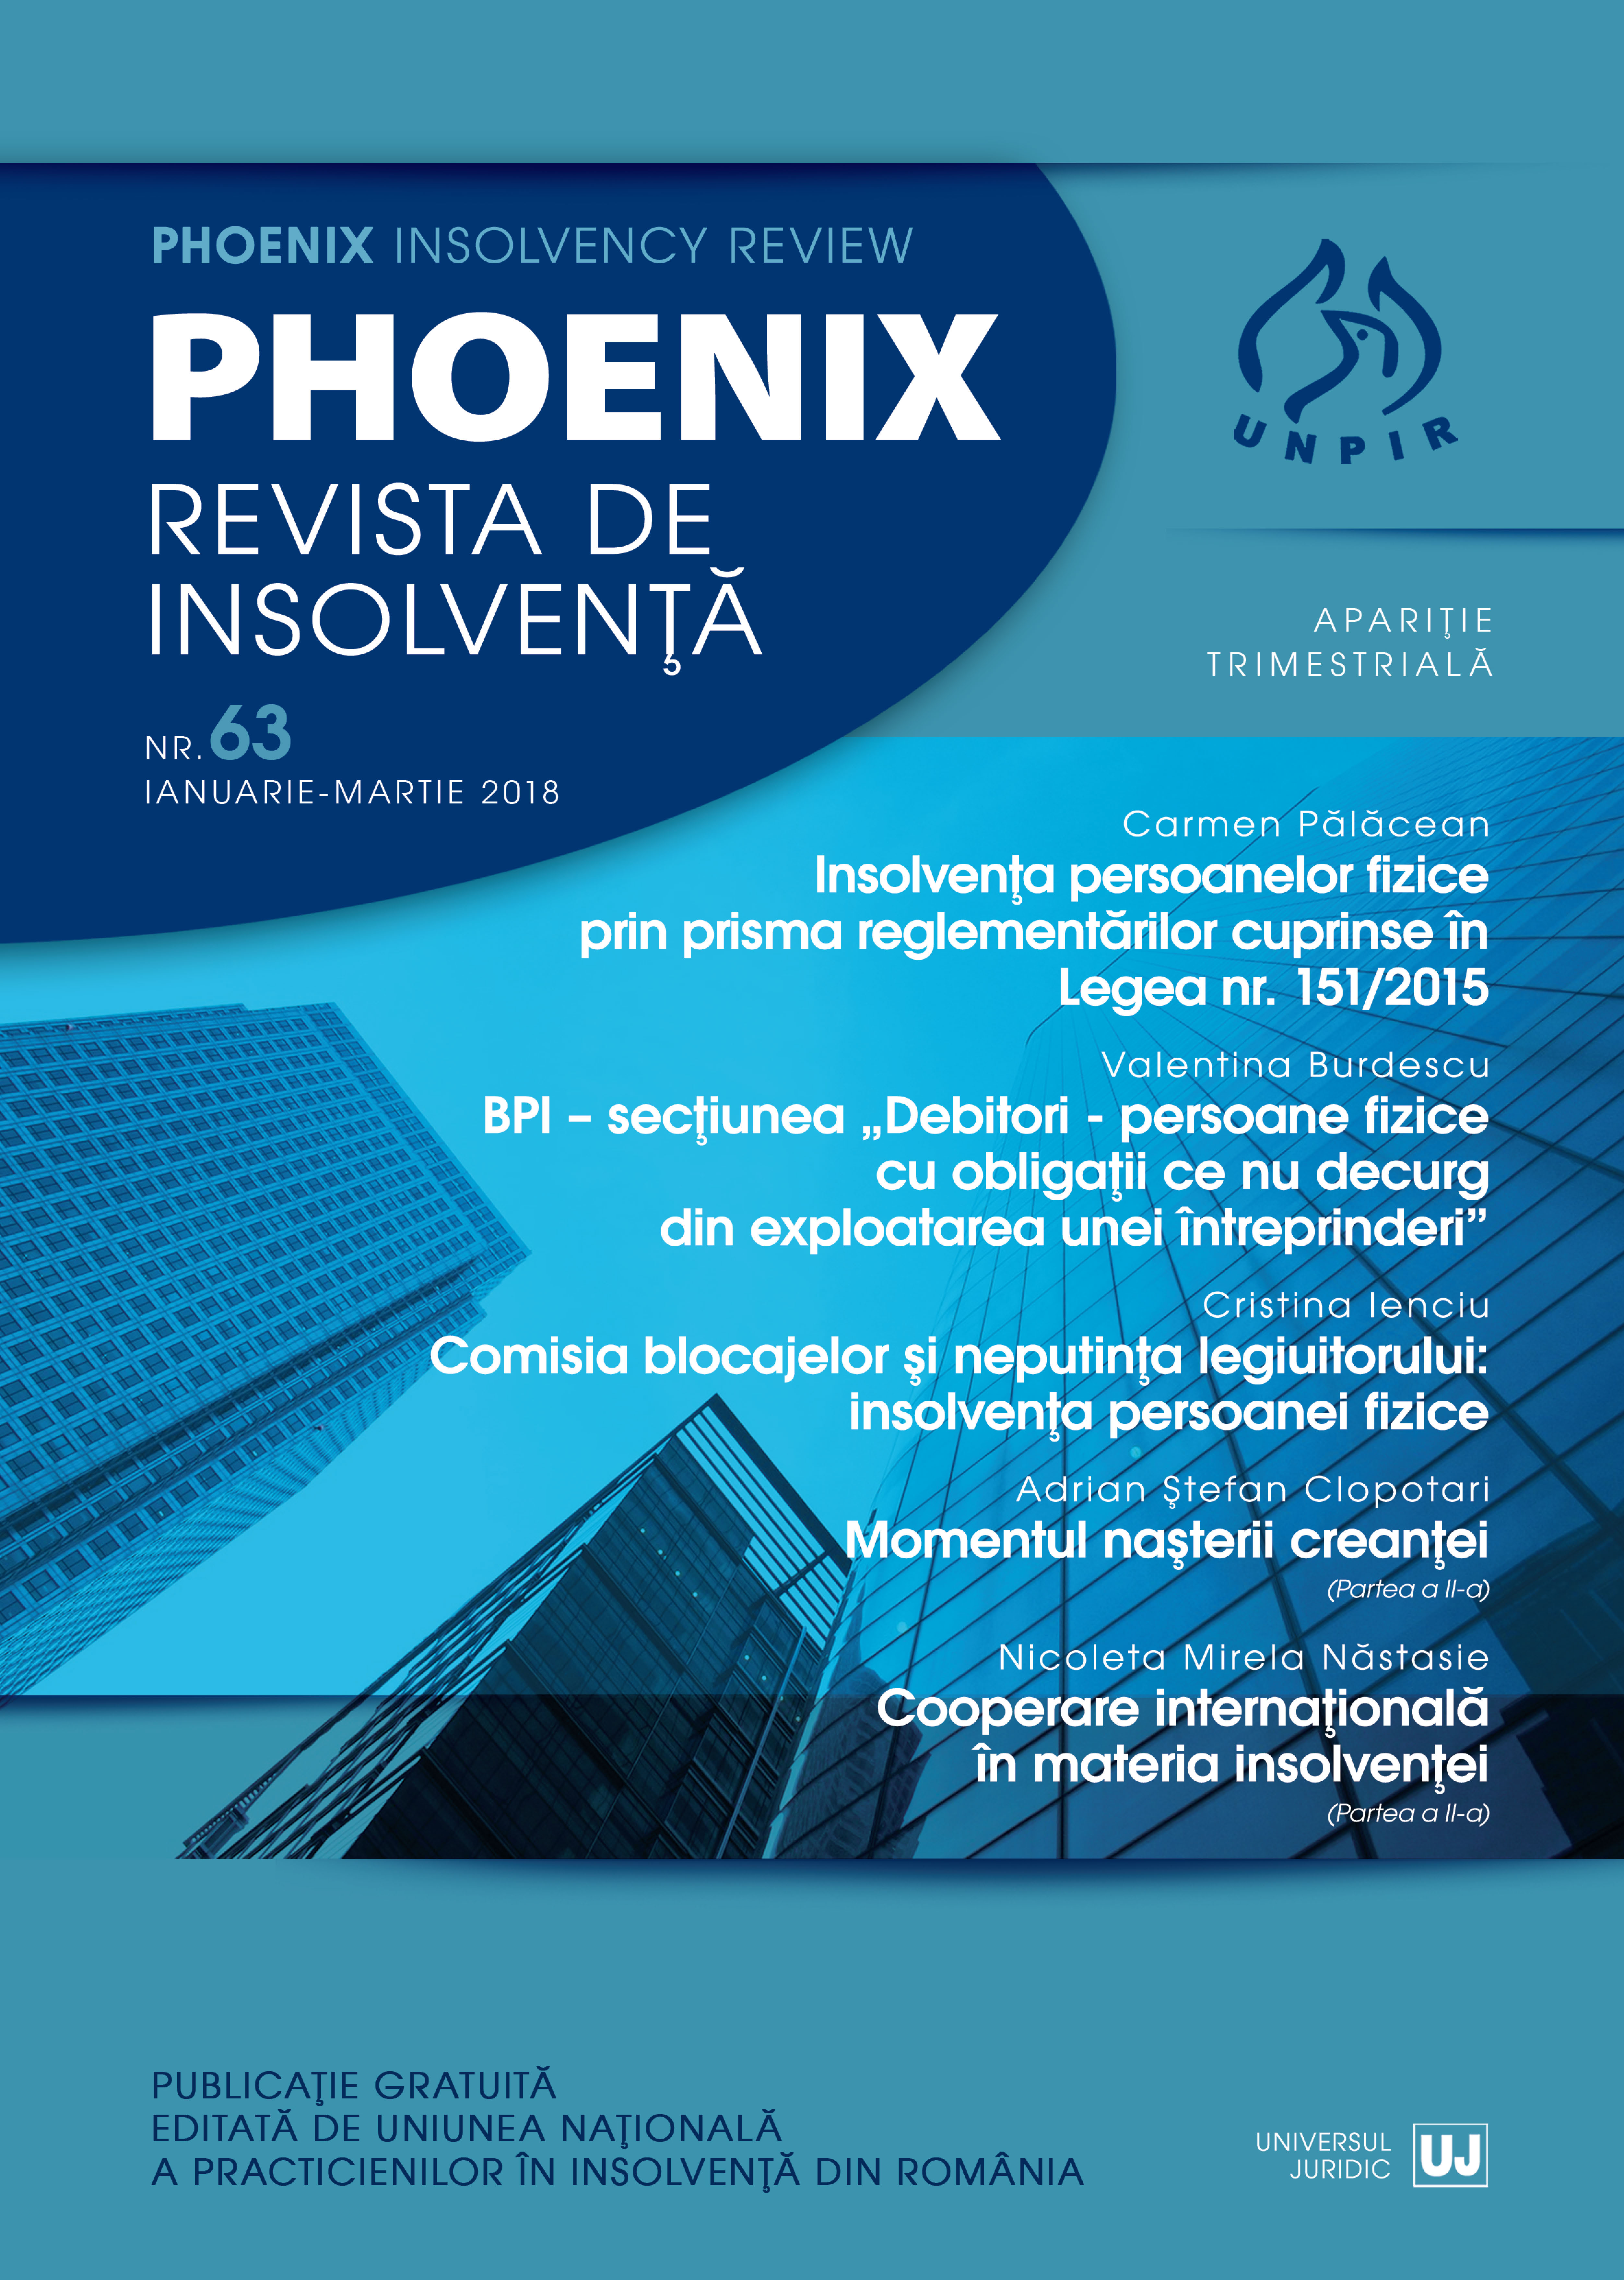 INTERNATIONAL COOPERATION IN THE AREA OF INSOLVENCY Cover Image